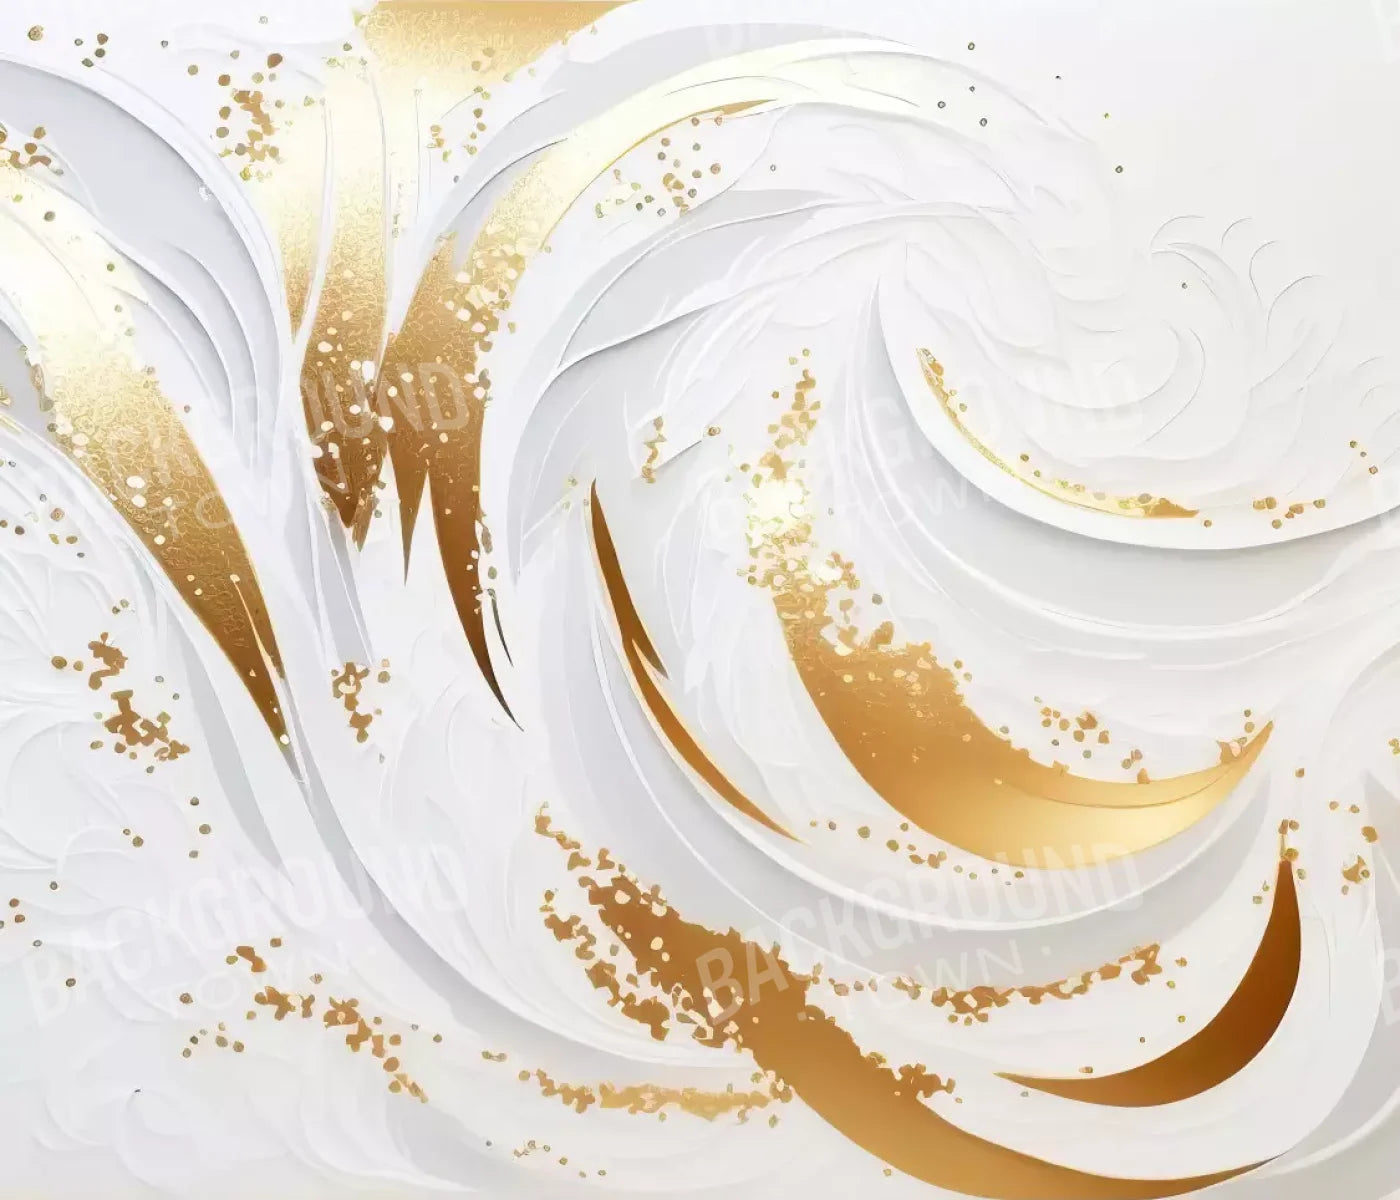 Abstract Swirl In White And Gold H 12X10 Ultracloth ( 144 X 120 Inch ) Backdrop